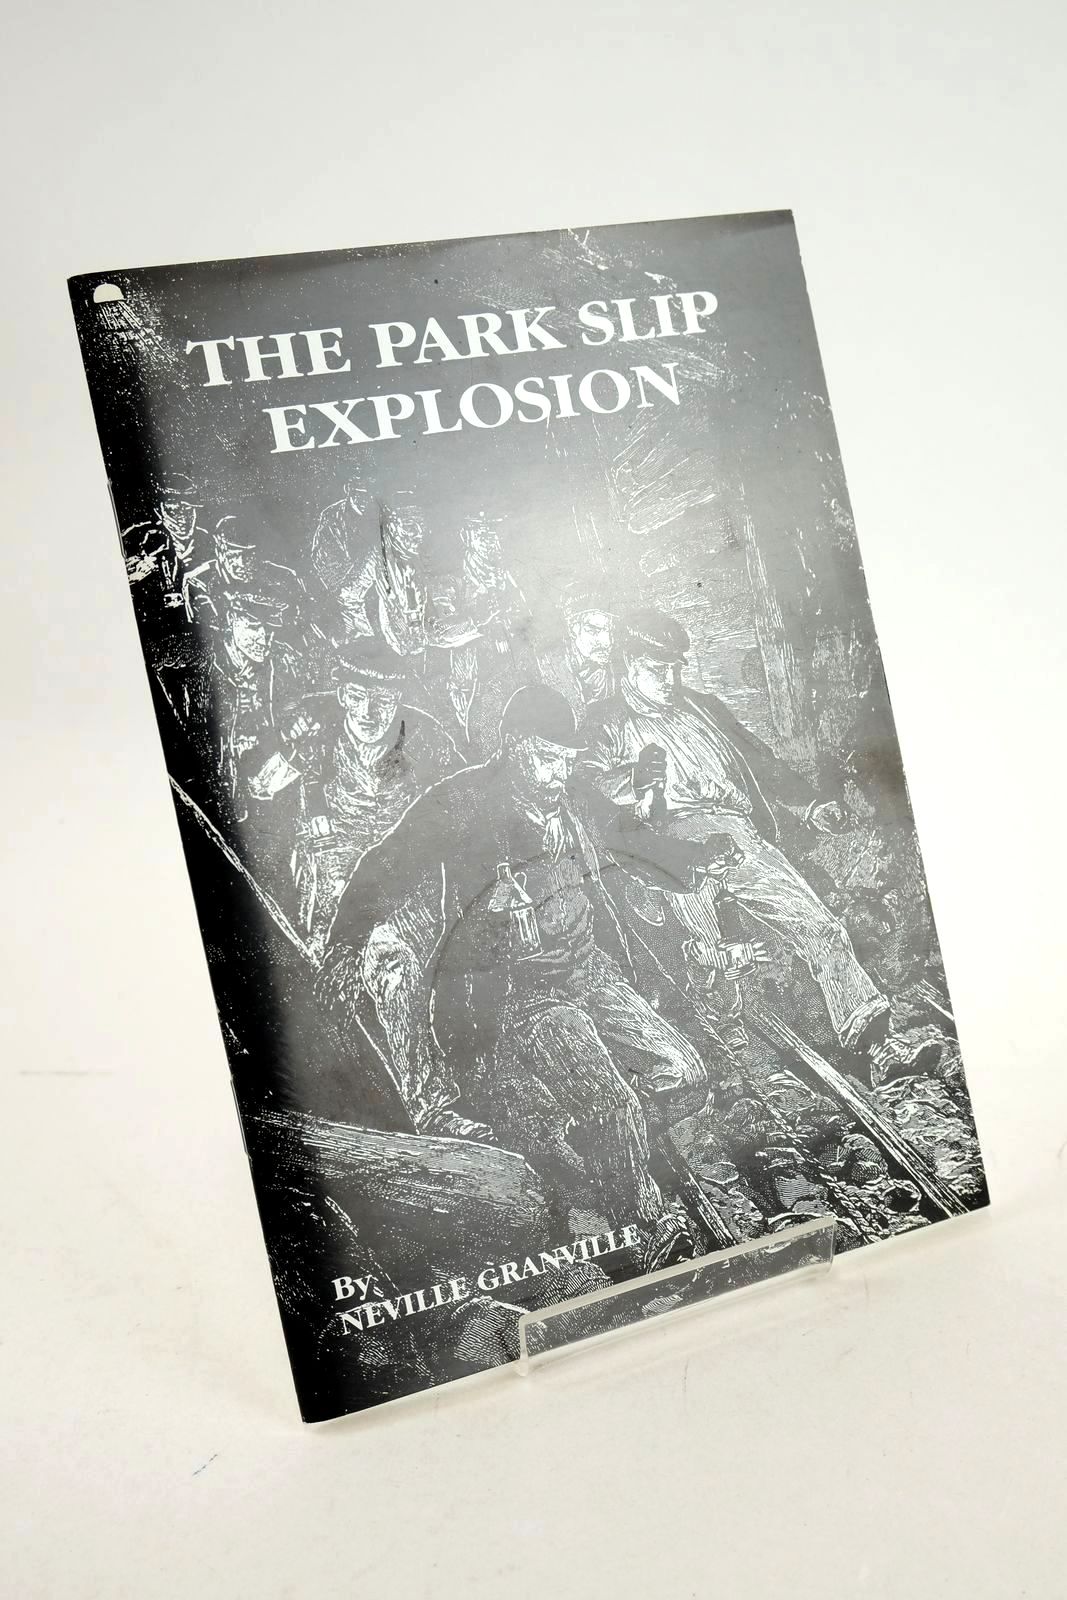 Photo of THE PARK SLIP EXPLOSION written by Granville, Neville published by Neville Granville (STOCK CODE: 1326905)  for sale by Stella & Rose's Books